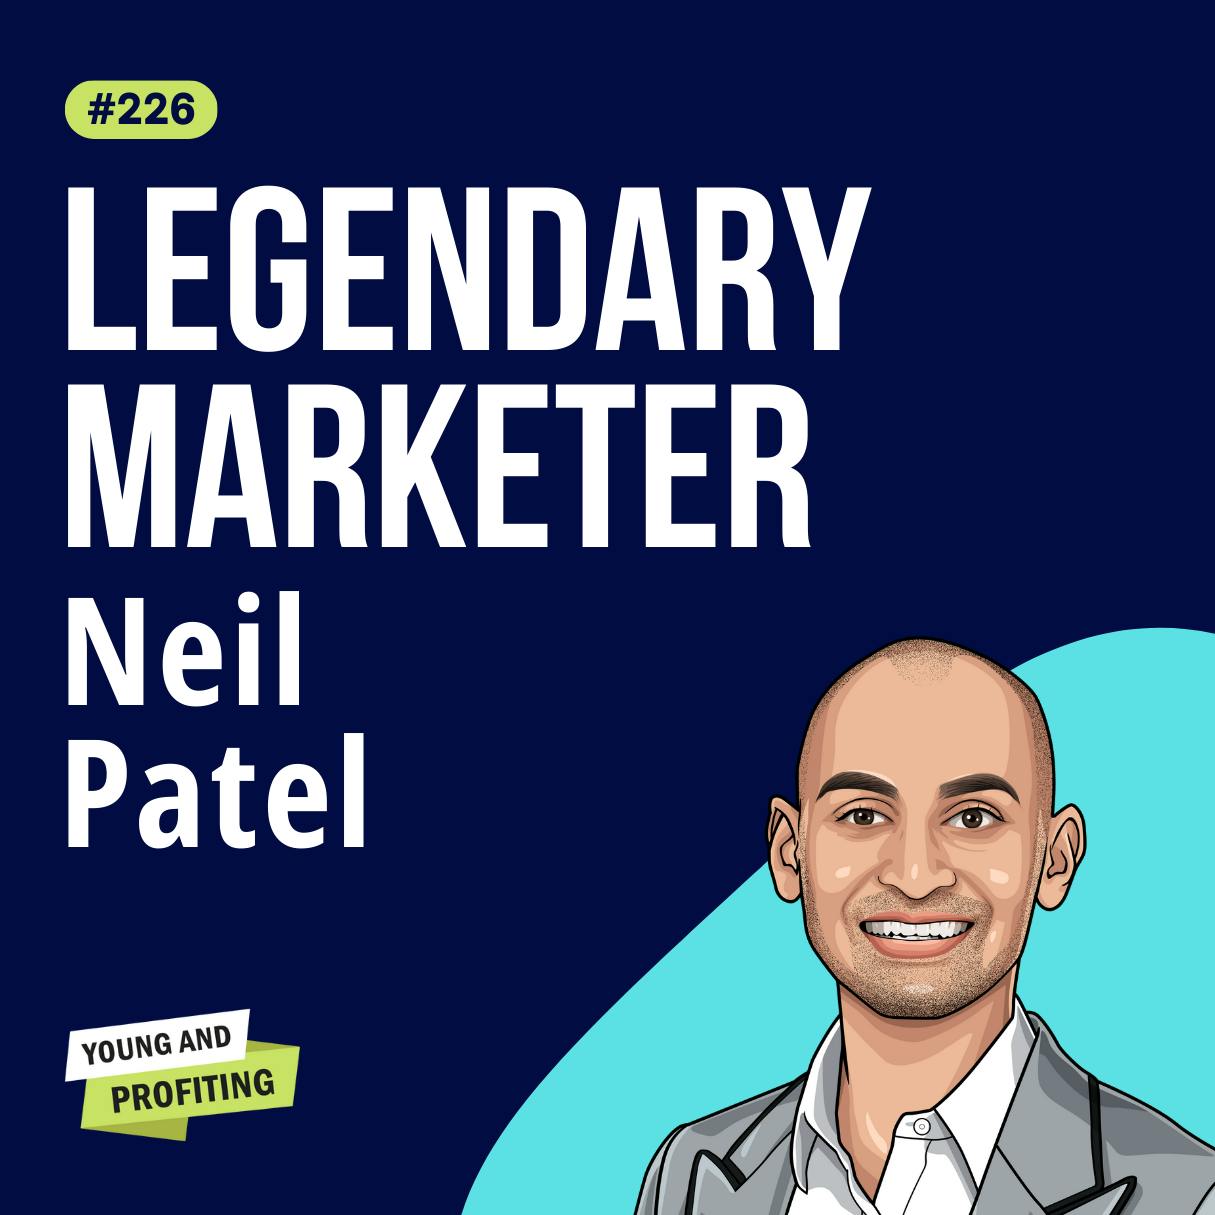 Neil Patel: Grow Your Business With These Digital Marketing Trends in 2023 | E226 by Hala Taha | YAP Media Network